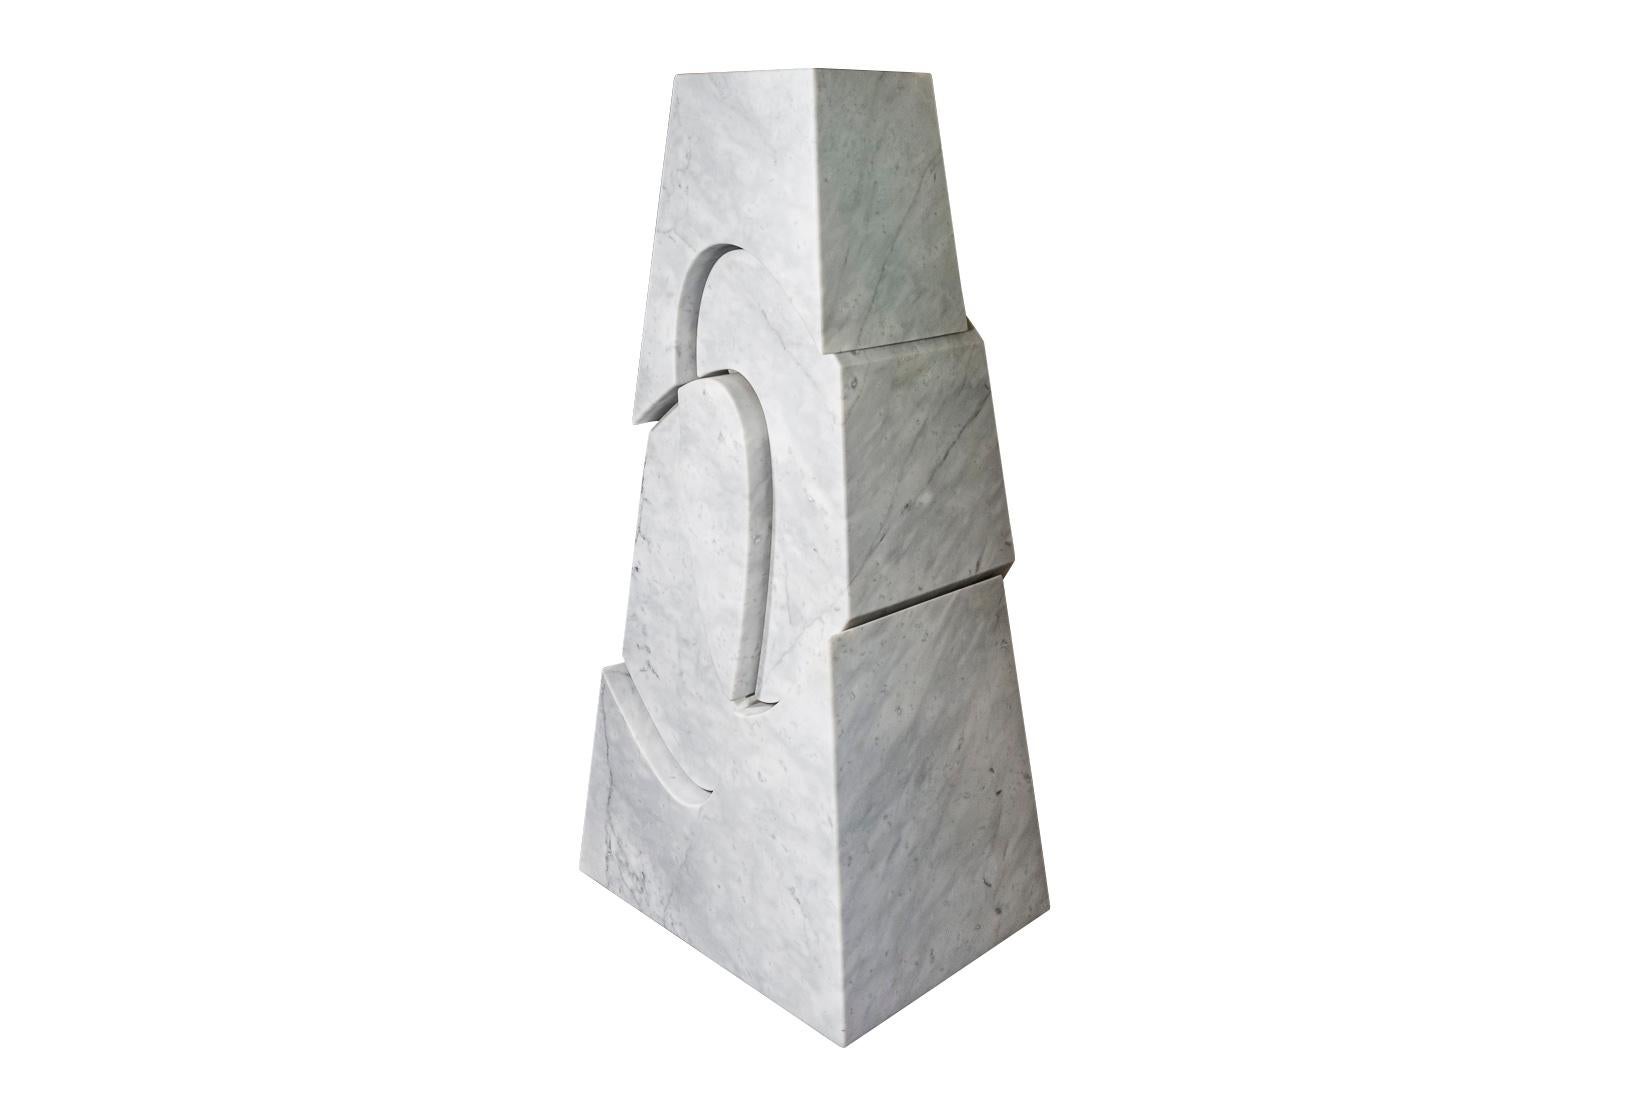 Angelo Mangiarotti (1921-2012), Monumental Sculpture Cambiamiento, Carrara marble, Made of 5 interlocked pieces, Italy, circa 2006.

Measures: Height 163 cm, width 79 cm, depth 60 cm.

Reference: Exposition catalog, Angelo Mangiarotti: Matter and